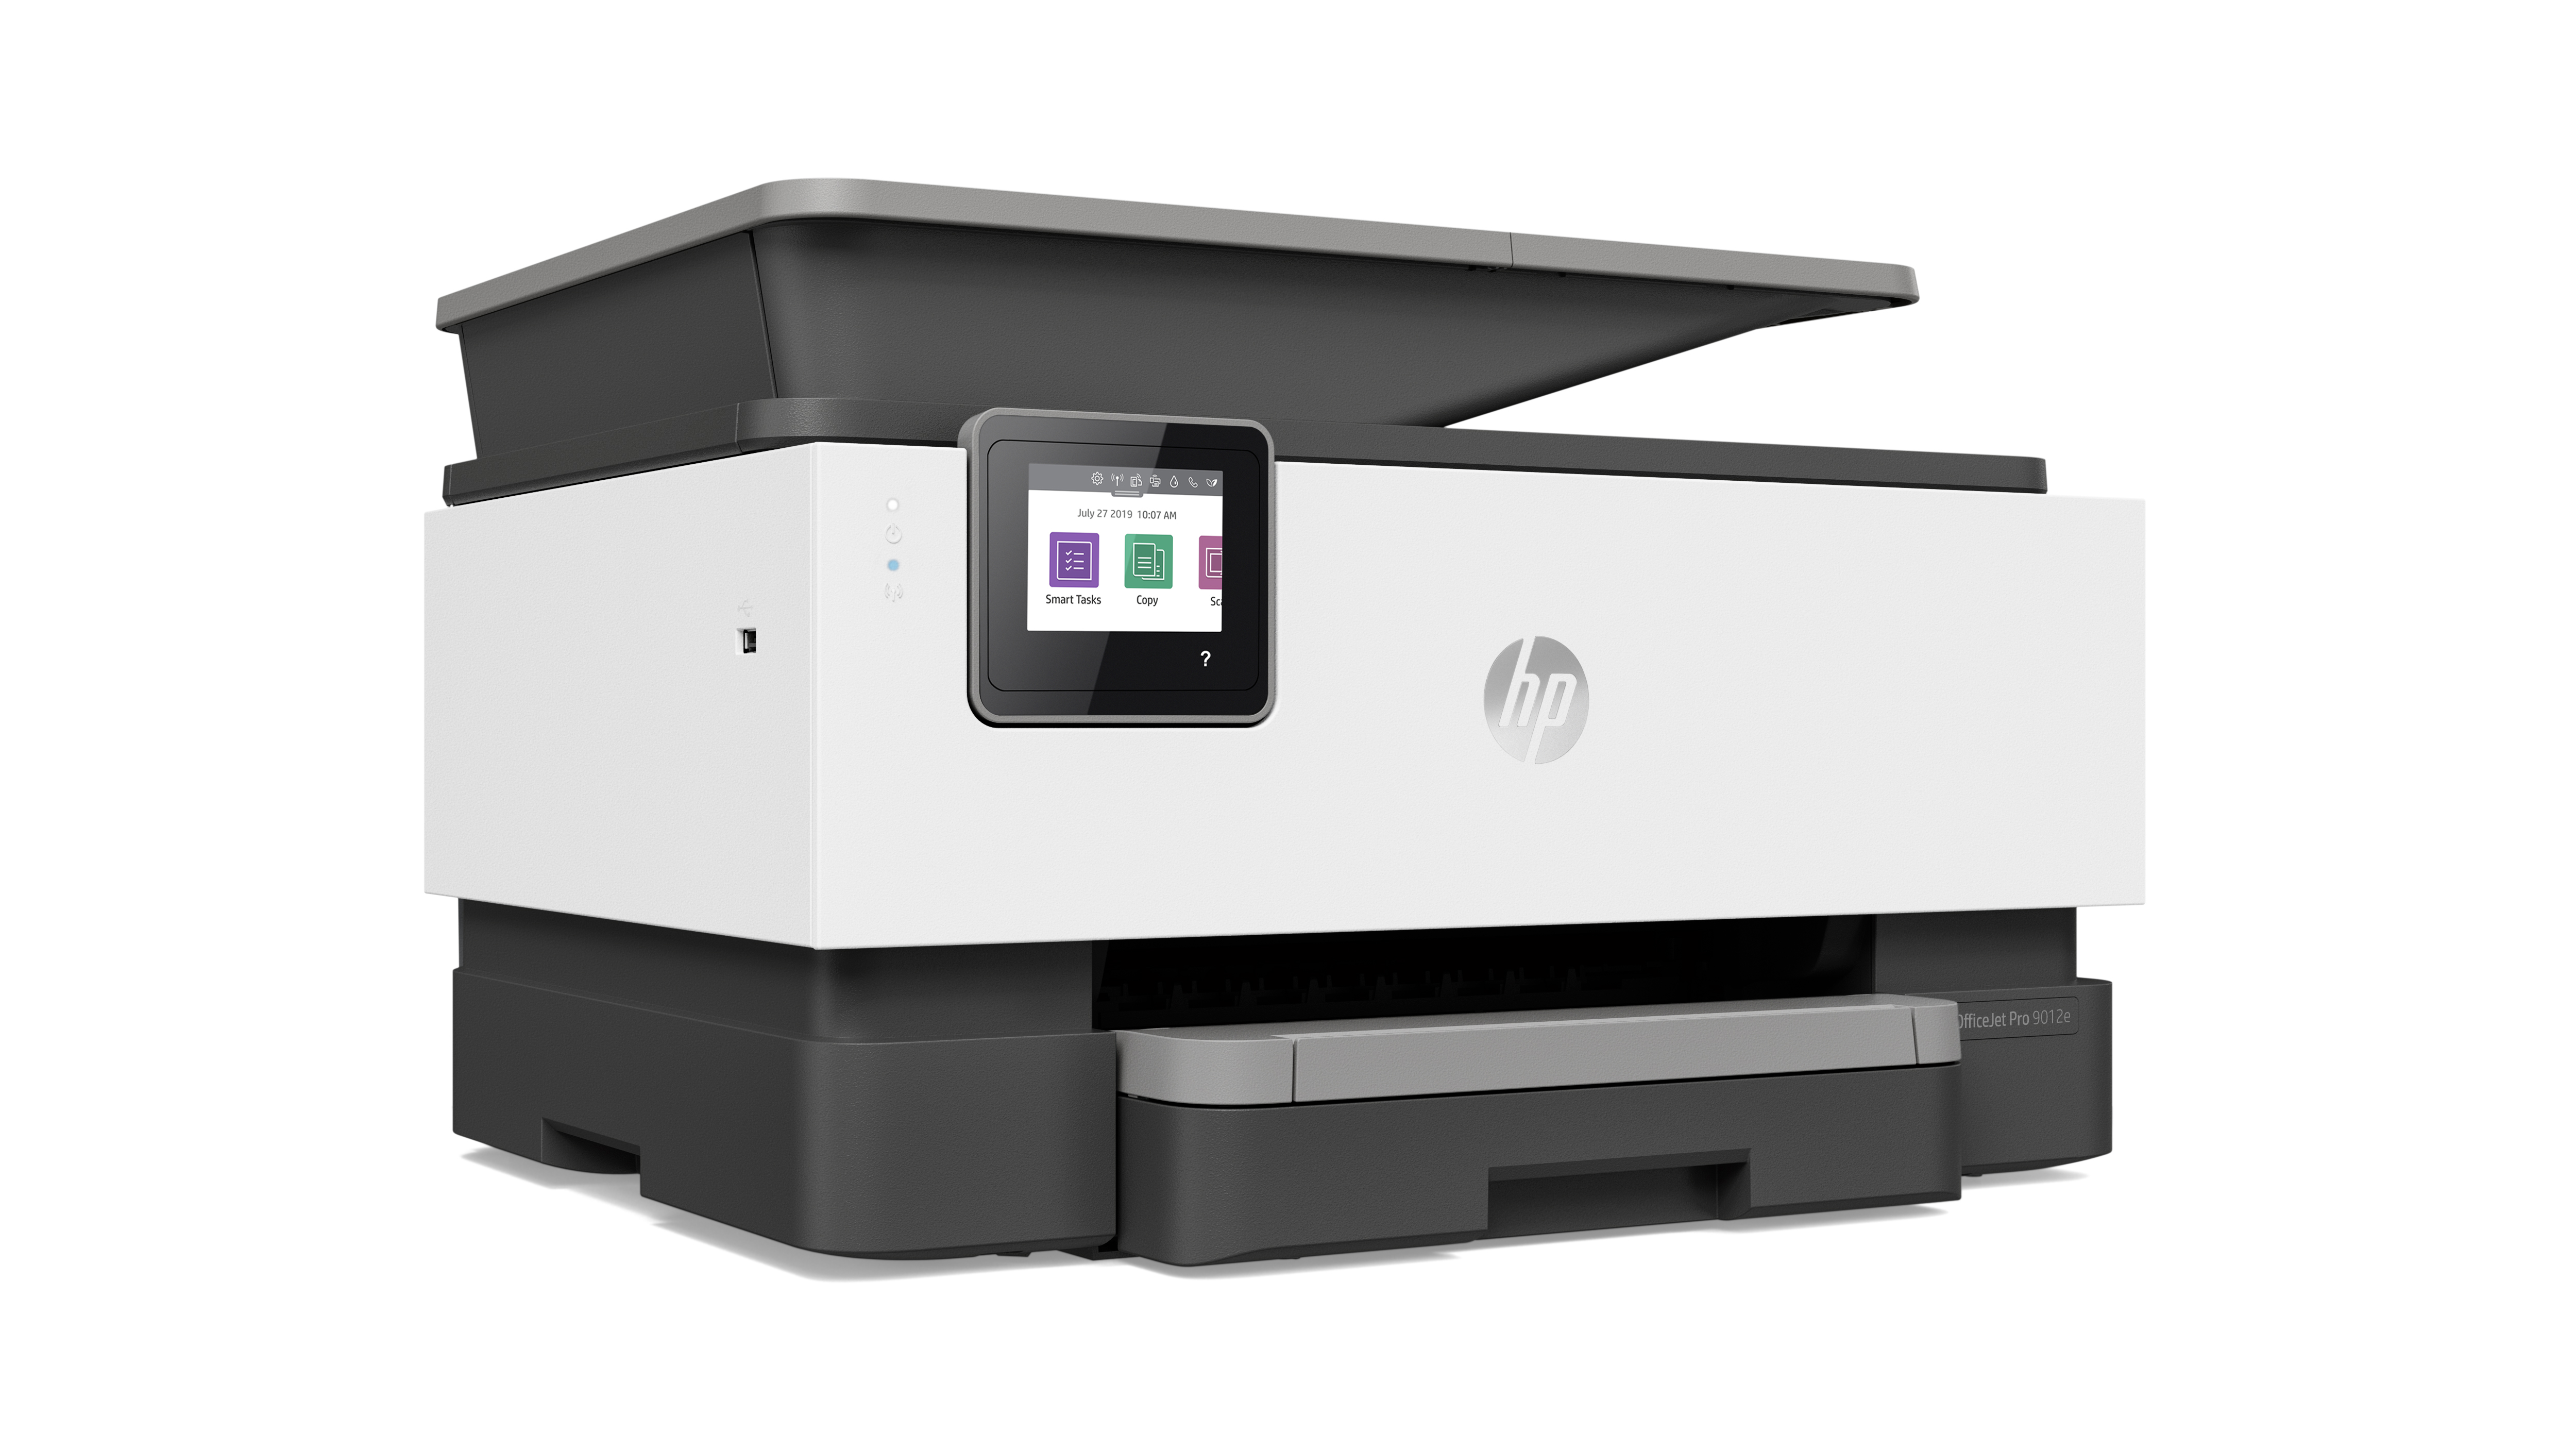 NEW FAX HP OfficeJet 8022e All-in-One Wireless Color Inkjet Printer INK  INCLUDED